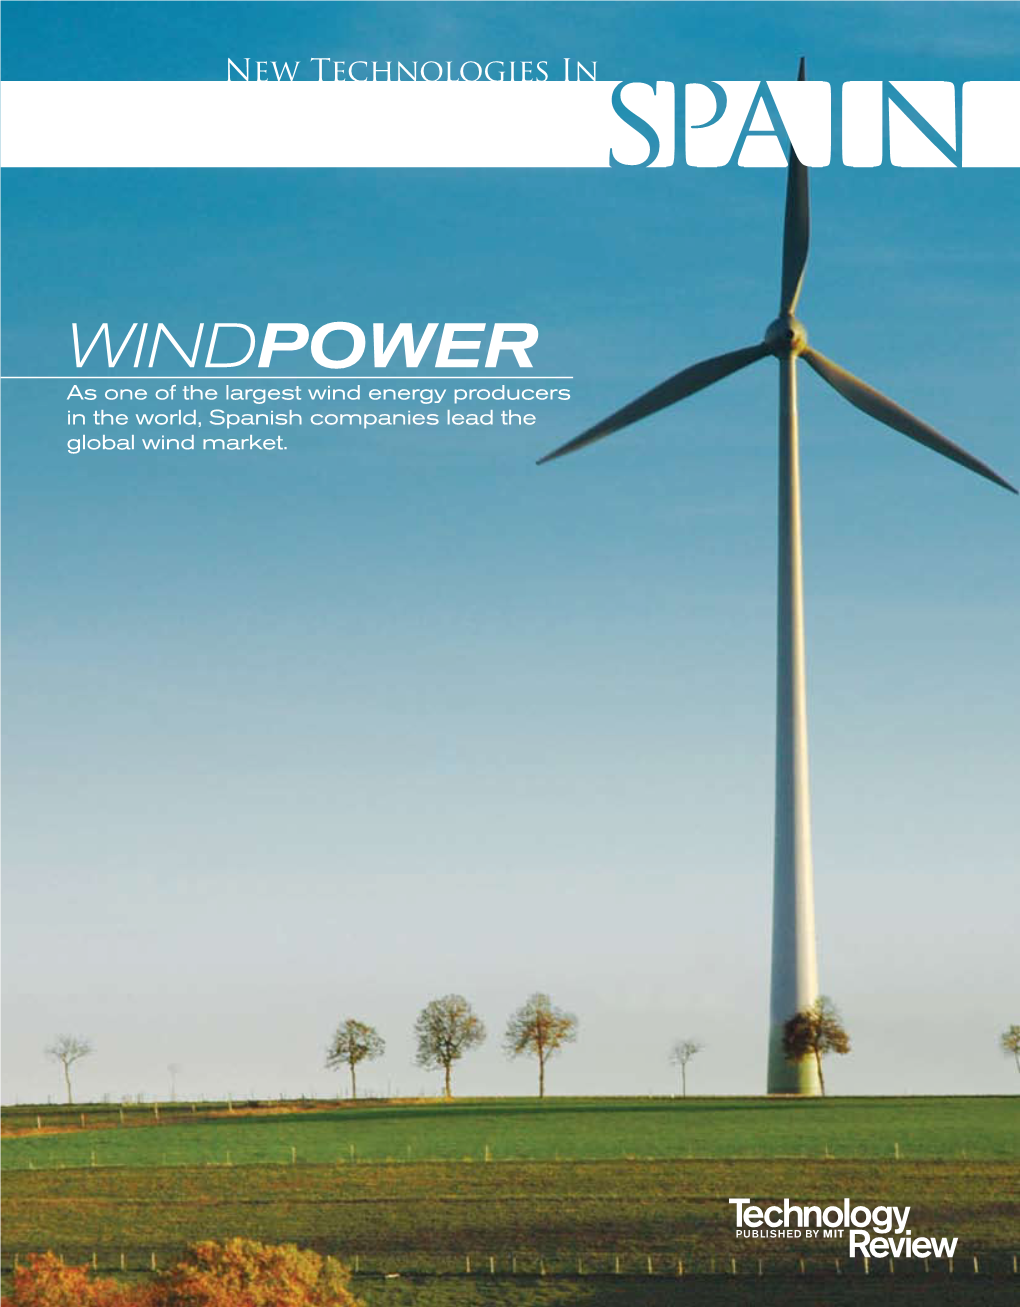 Windpower As One of the Largest Wind Energy Producers in the World, Spanish Companies Lead the Global Wind Market